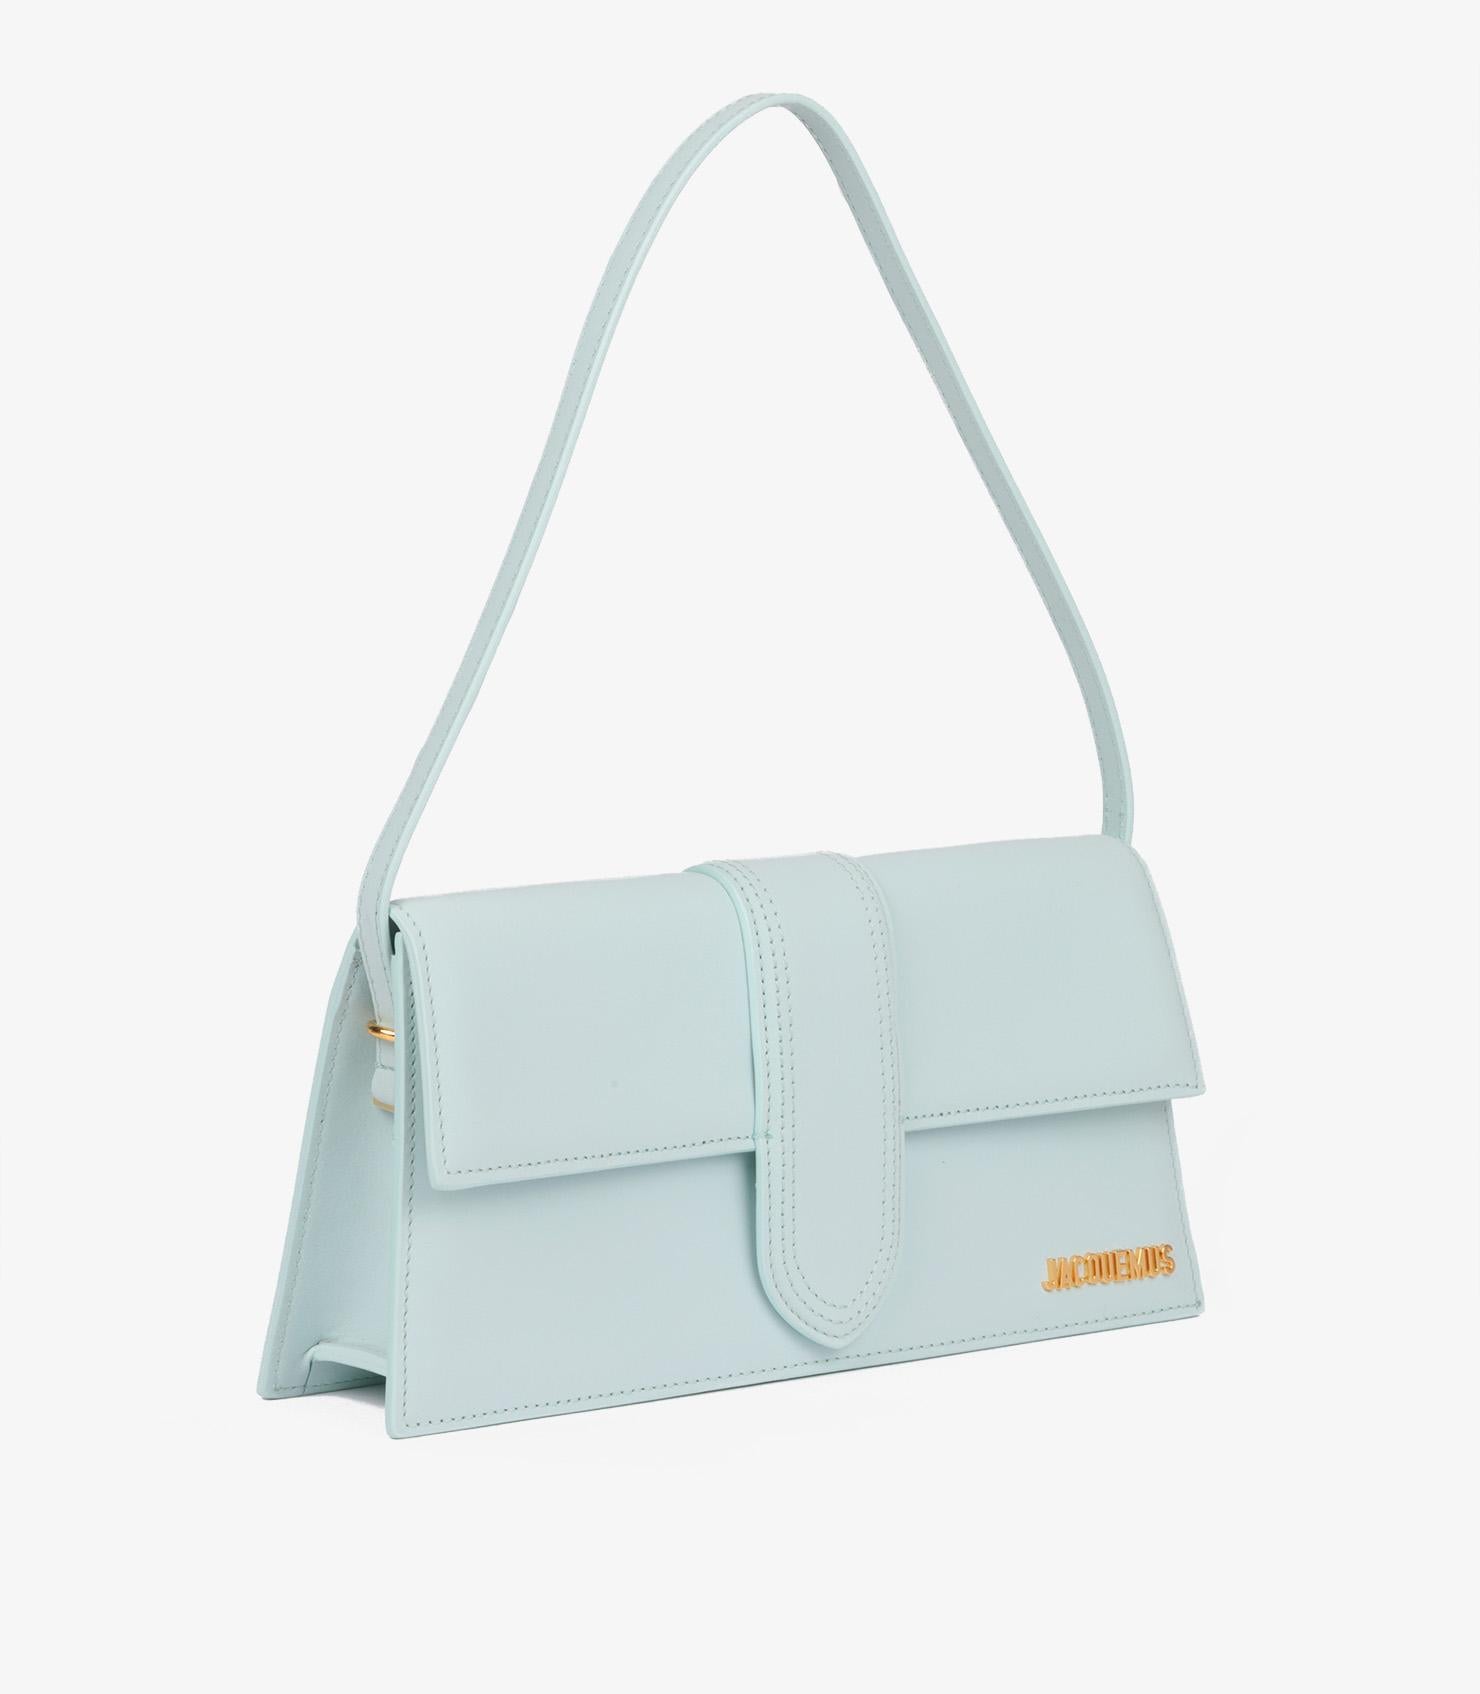 Jacquemus Pale Blue Smooth Calfskin Leather Le Bambino Long

Brand-Jacquemus
Model- Le Bambino Long
Product Type- Shoulder, Top Handle
Age- Circa 2023
Colour- Pale Blue
Hardware- Gold
Material(s)- Calfskin Leather

Height- 13.5cm
Width- 28cm
Depth-